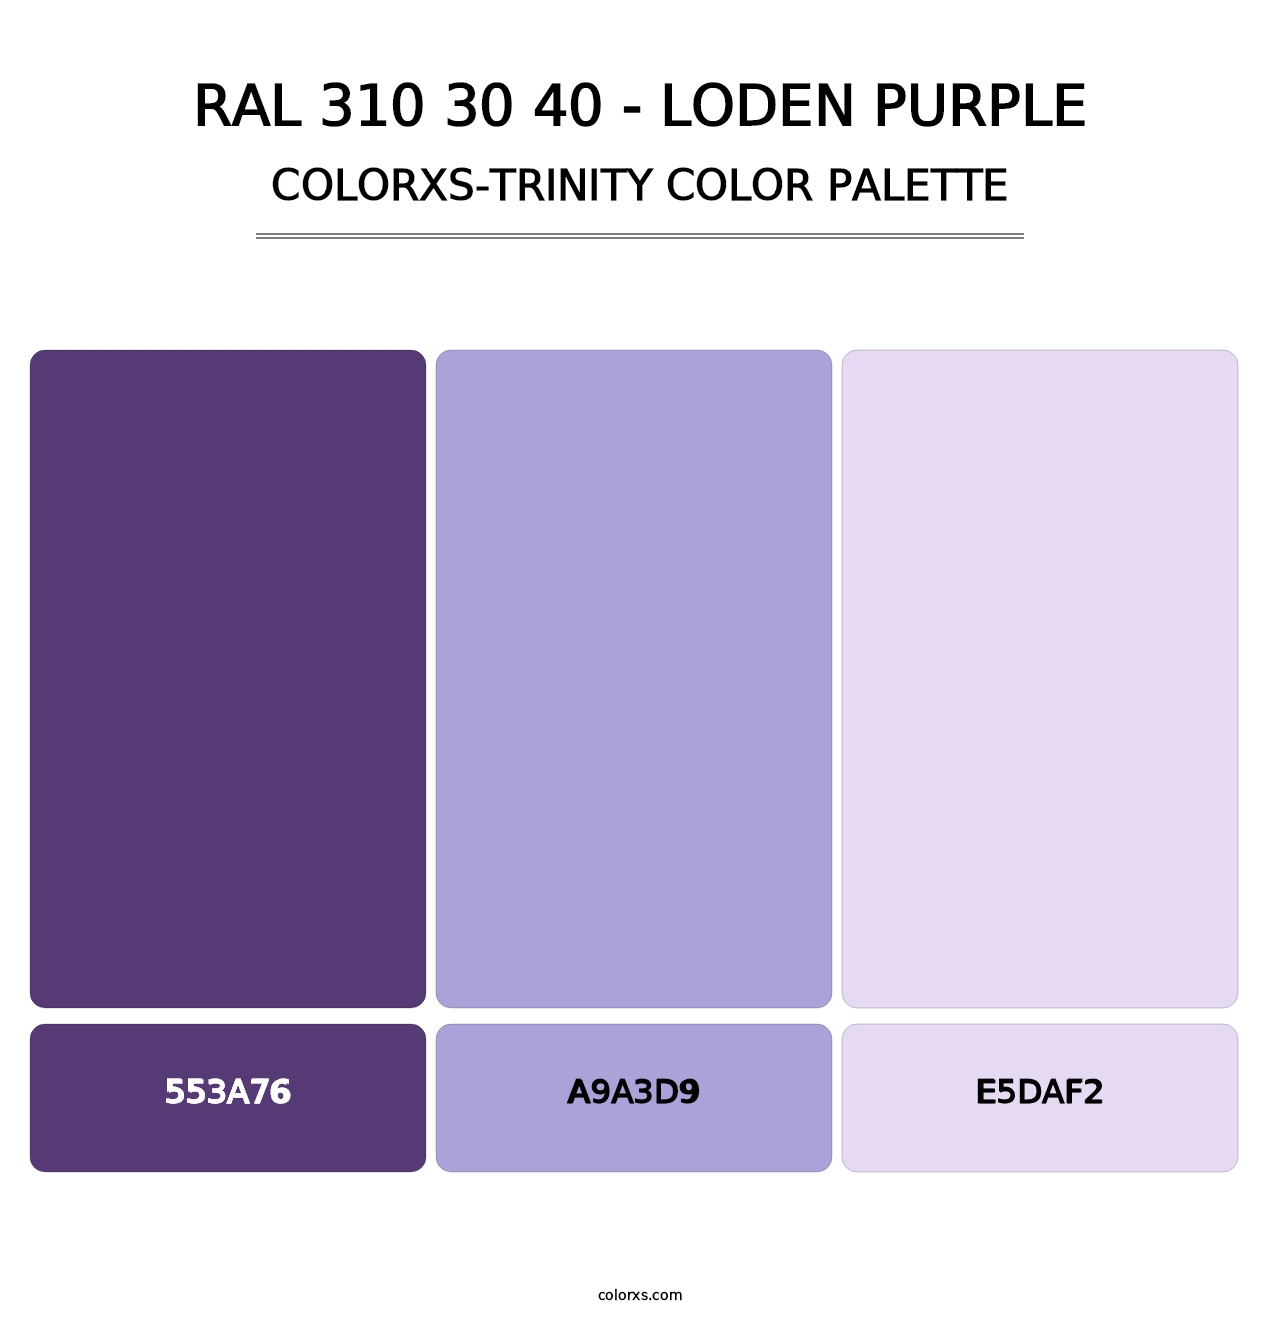 RAL 310 30 40 - Loden Purple - Colorxs Trinity Palette